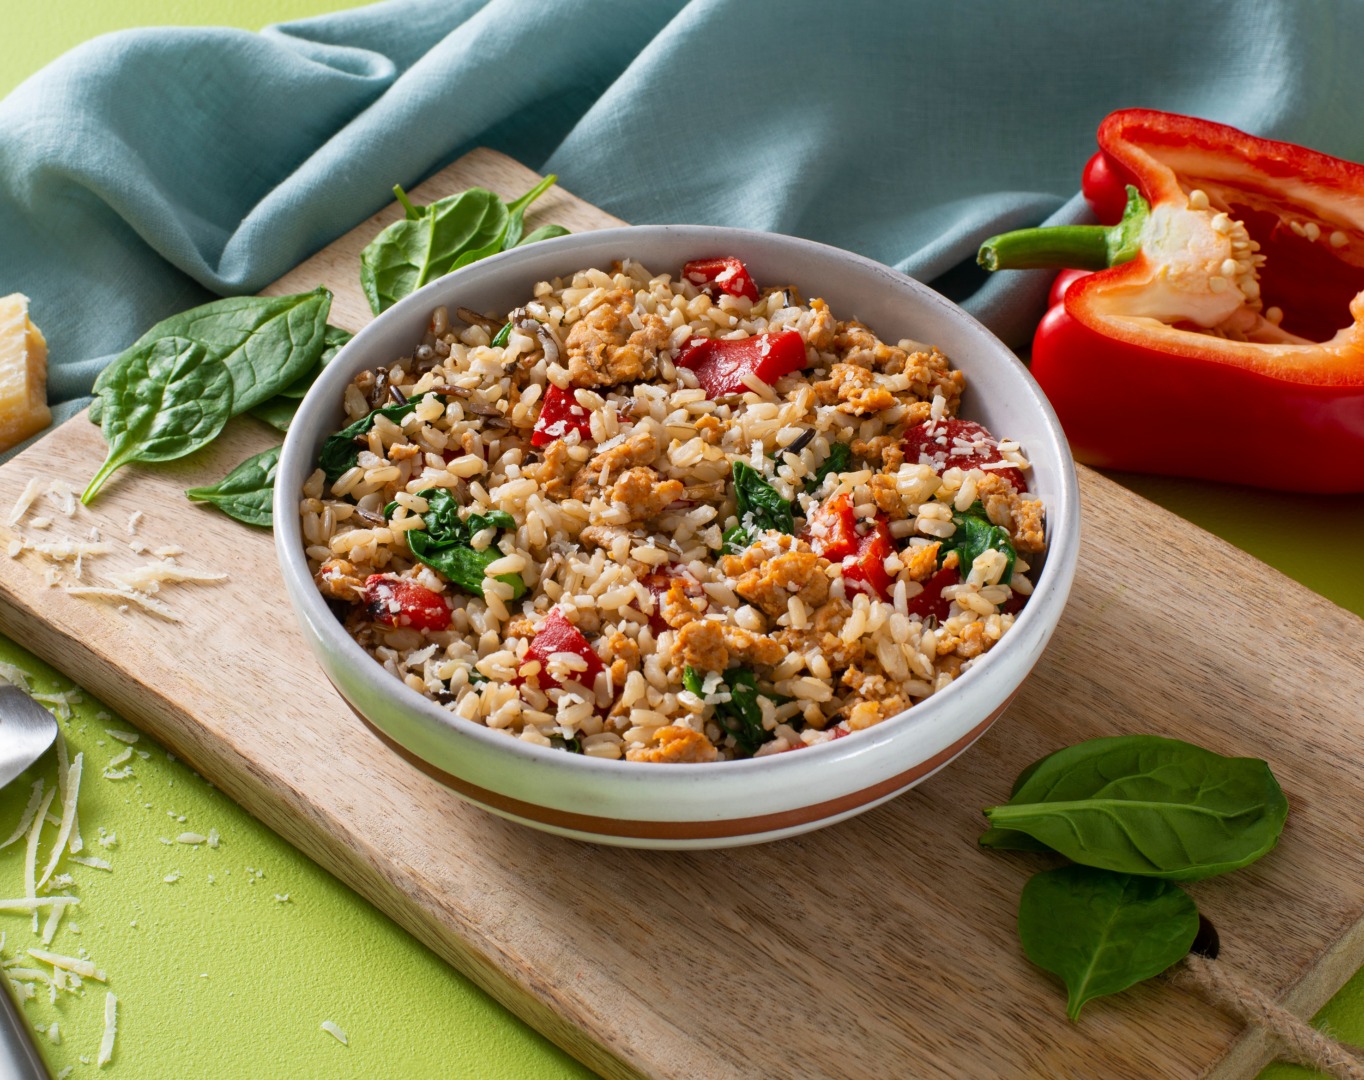 https://minuterice.com/wp-content/uploads/2019/03/BROWN-AND-WILD-RICE-WITH-SAUSAGE-025-1680x1330-1.jpg